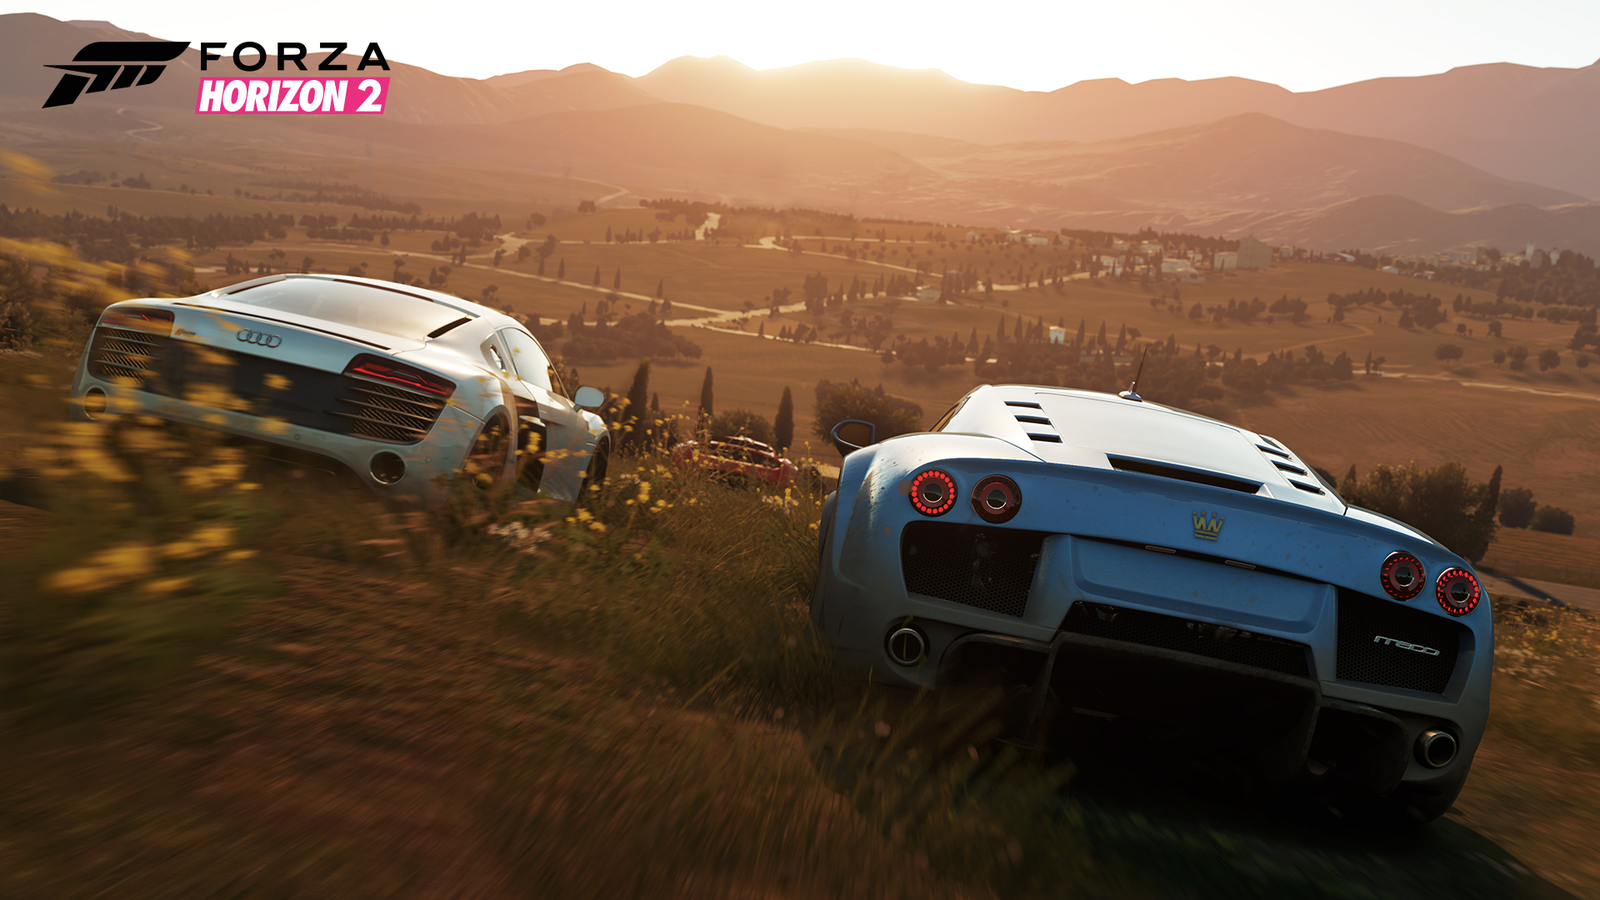 Forza Horizon 2 on Xbox One? - FH2 Discussion - Official Forza